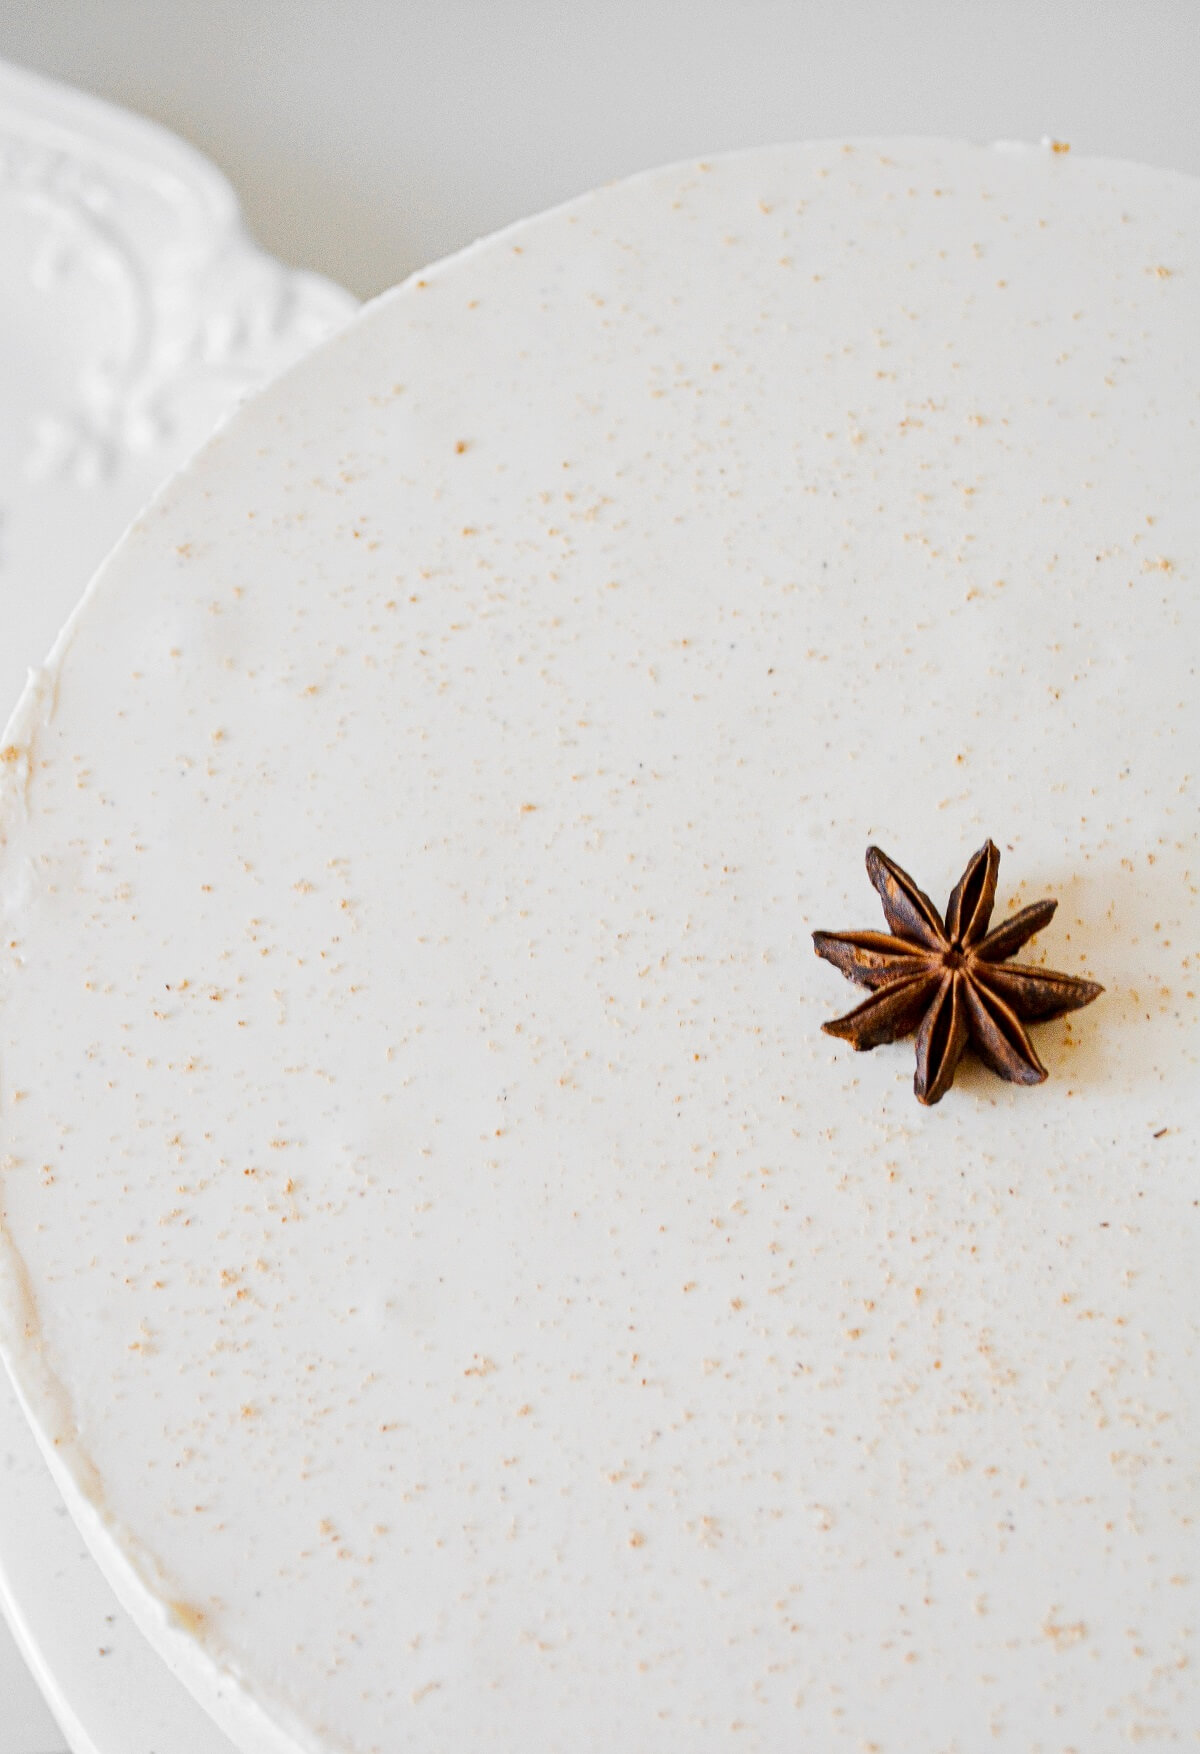 Eggnog cheesecake topped with nutmeg and a star anise.